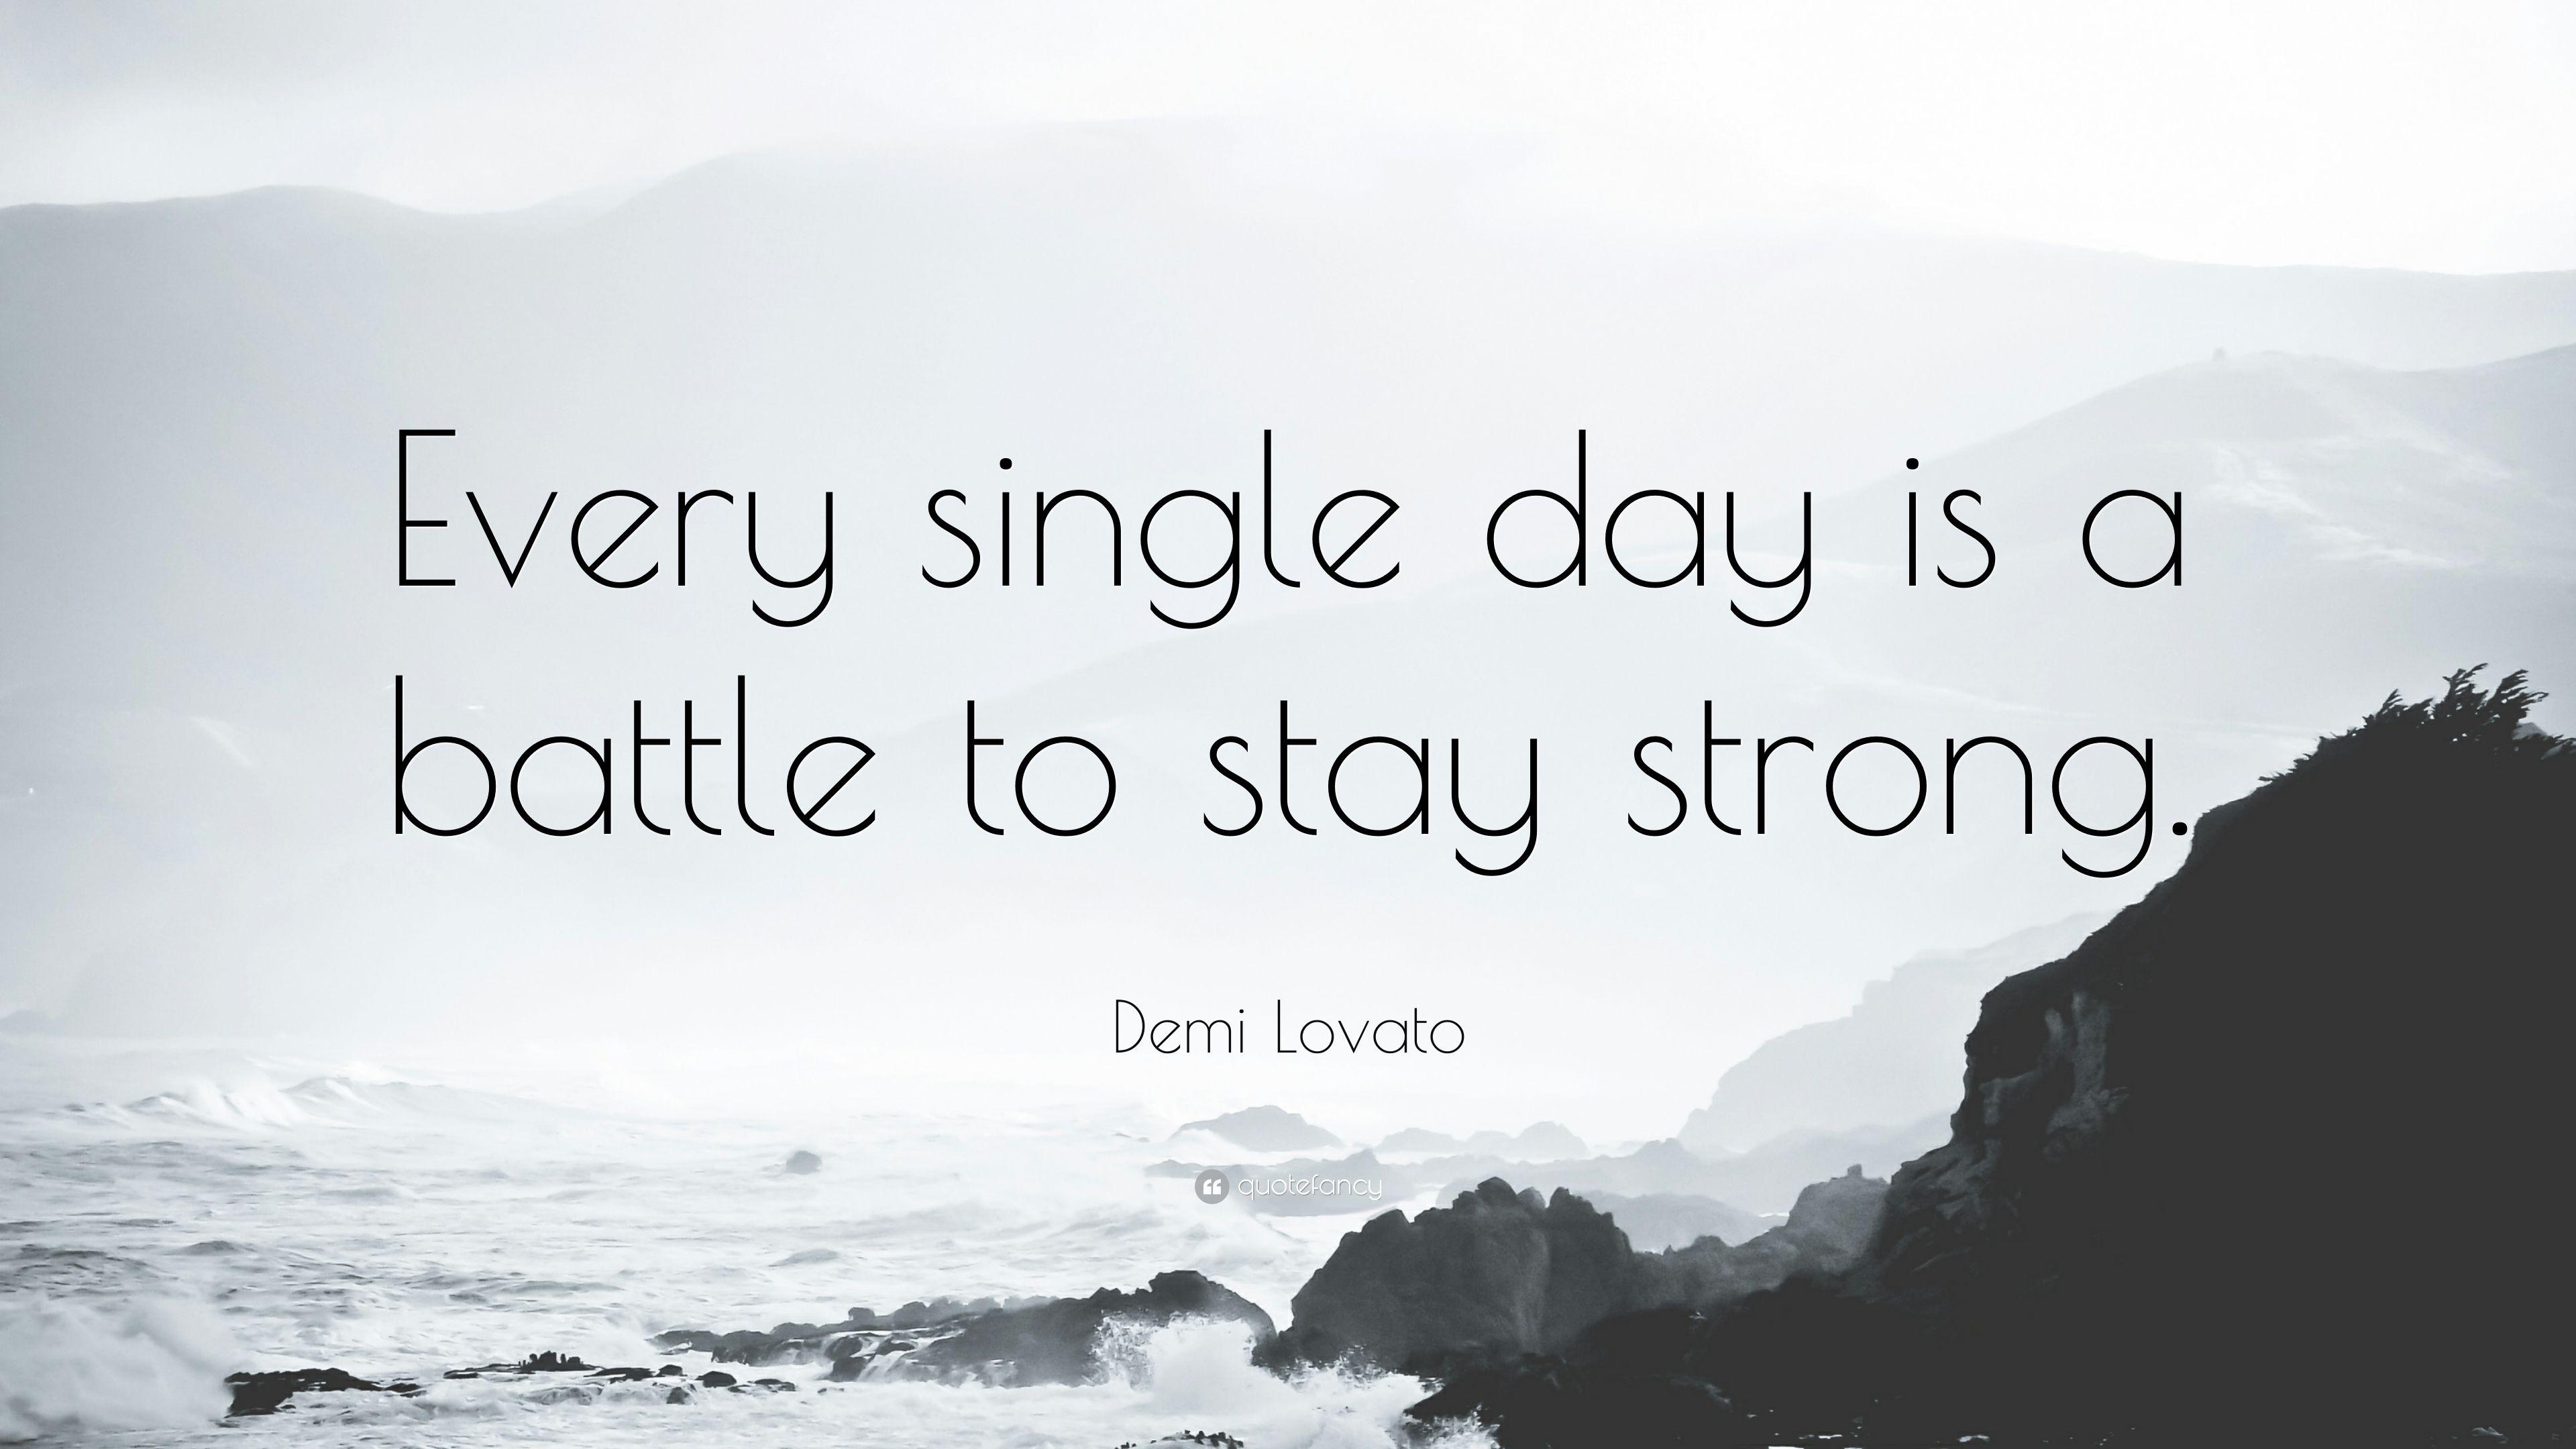 Demi Lovato Quote: “Every single day is a battle to stay strong.” (12 wallpaper)